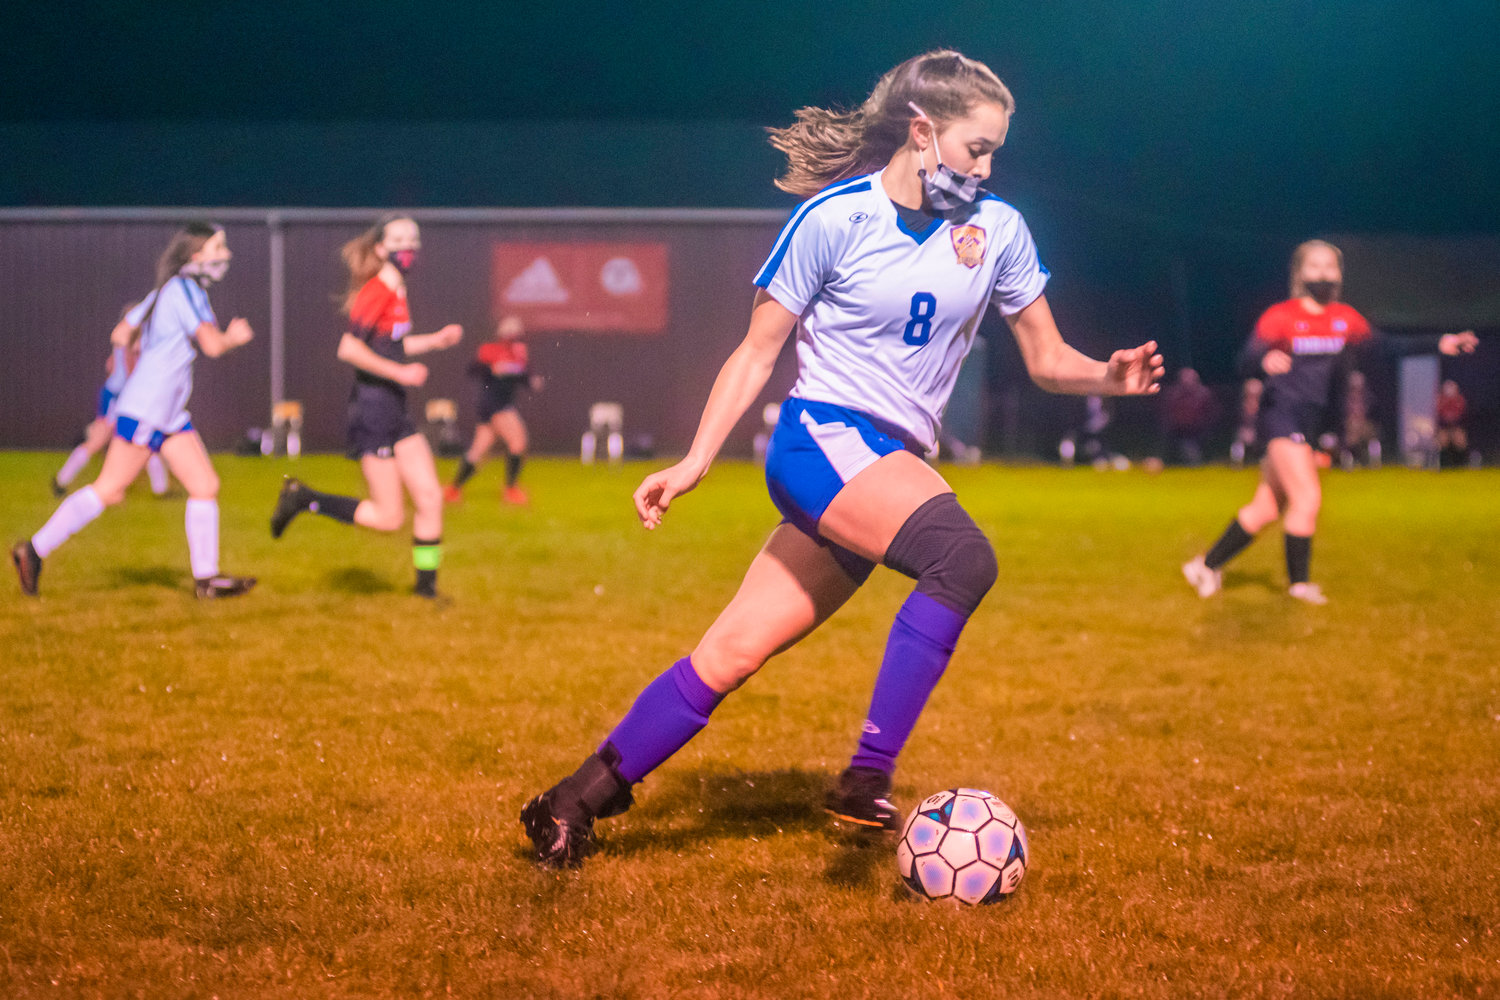 Onalaska’s Brooklyn Sandridge (8) takes the ball down the field during a soccer game Monday night in Toledo.